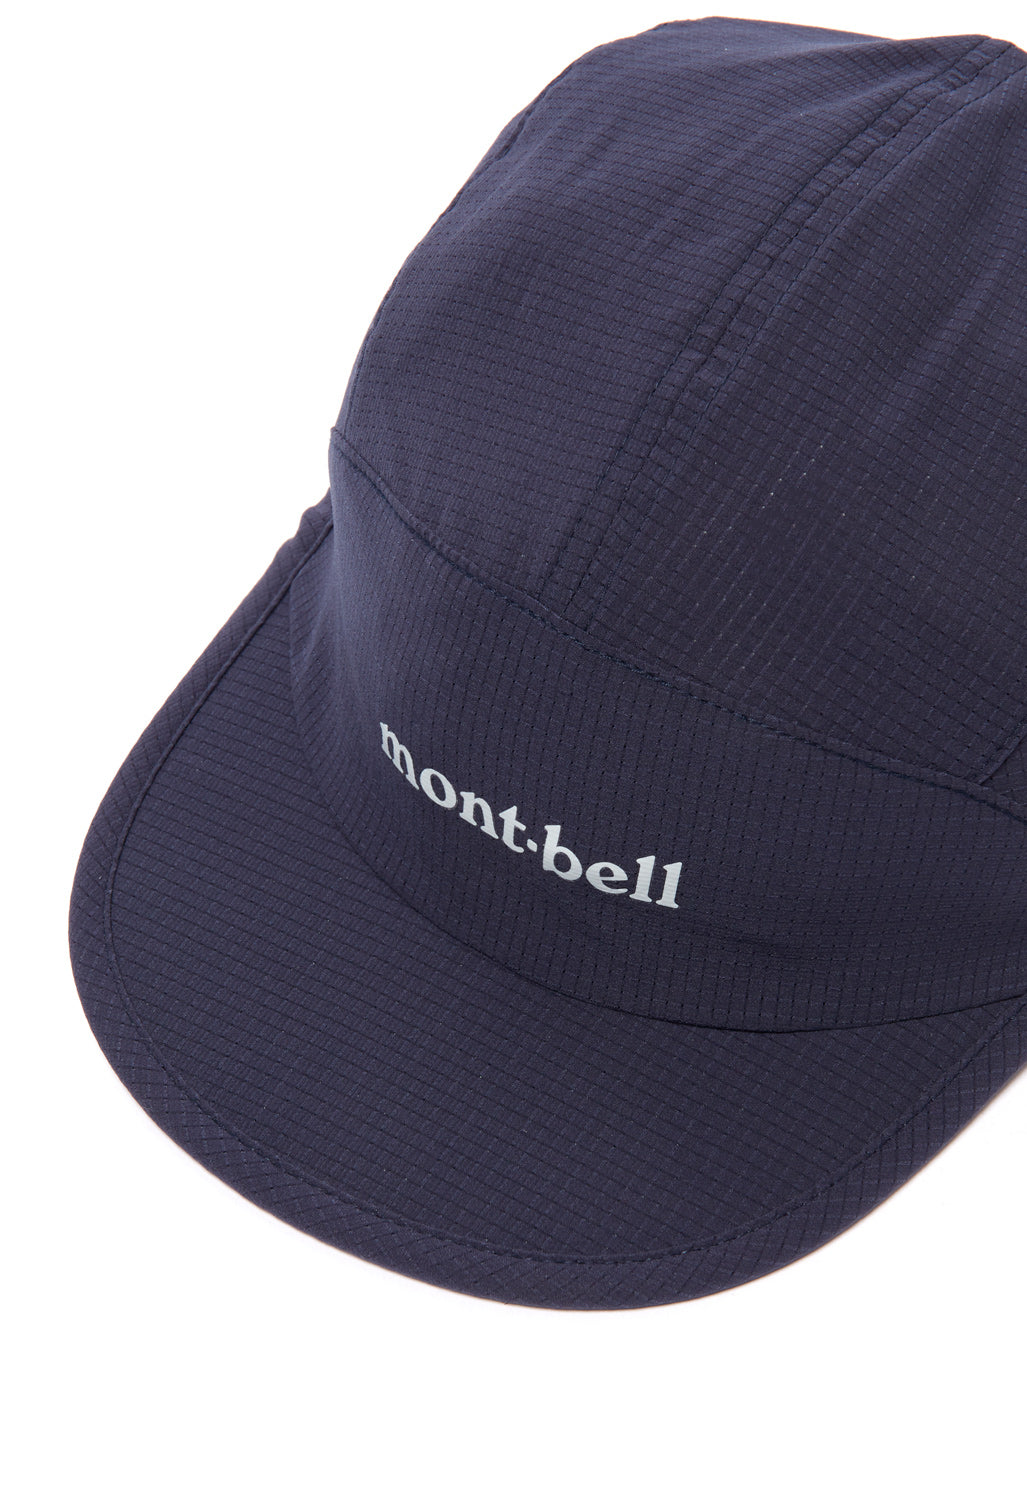 Montbell Breeze Dot Crushable Cap - Graphite